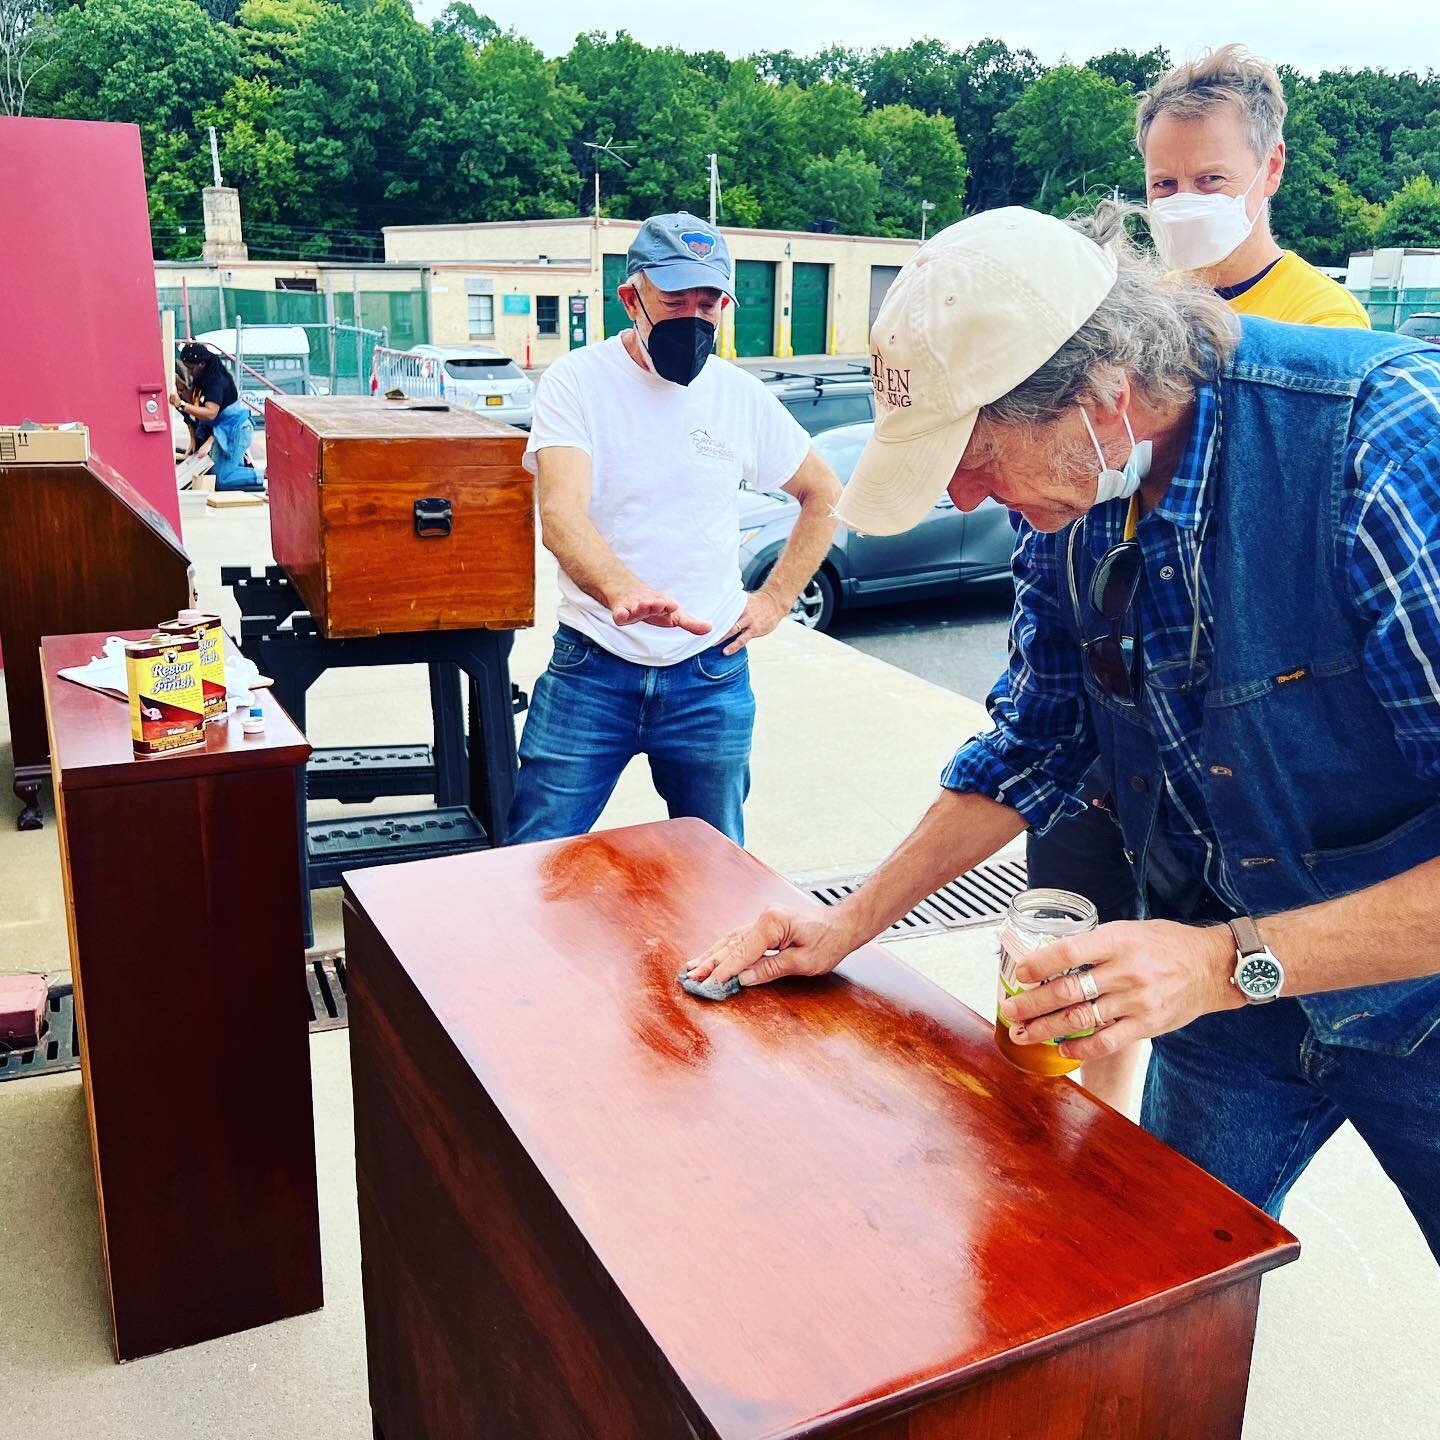 Thanks to Eric Clingen of Tarrytown Woodworking for guiding this morning&rsquo;s Fix it for Families workshop at @furnituresharehouse #fixitforfamilies #woodworking #furniturerestoration #communityworkshop